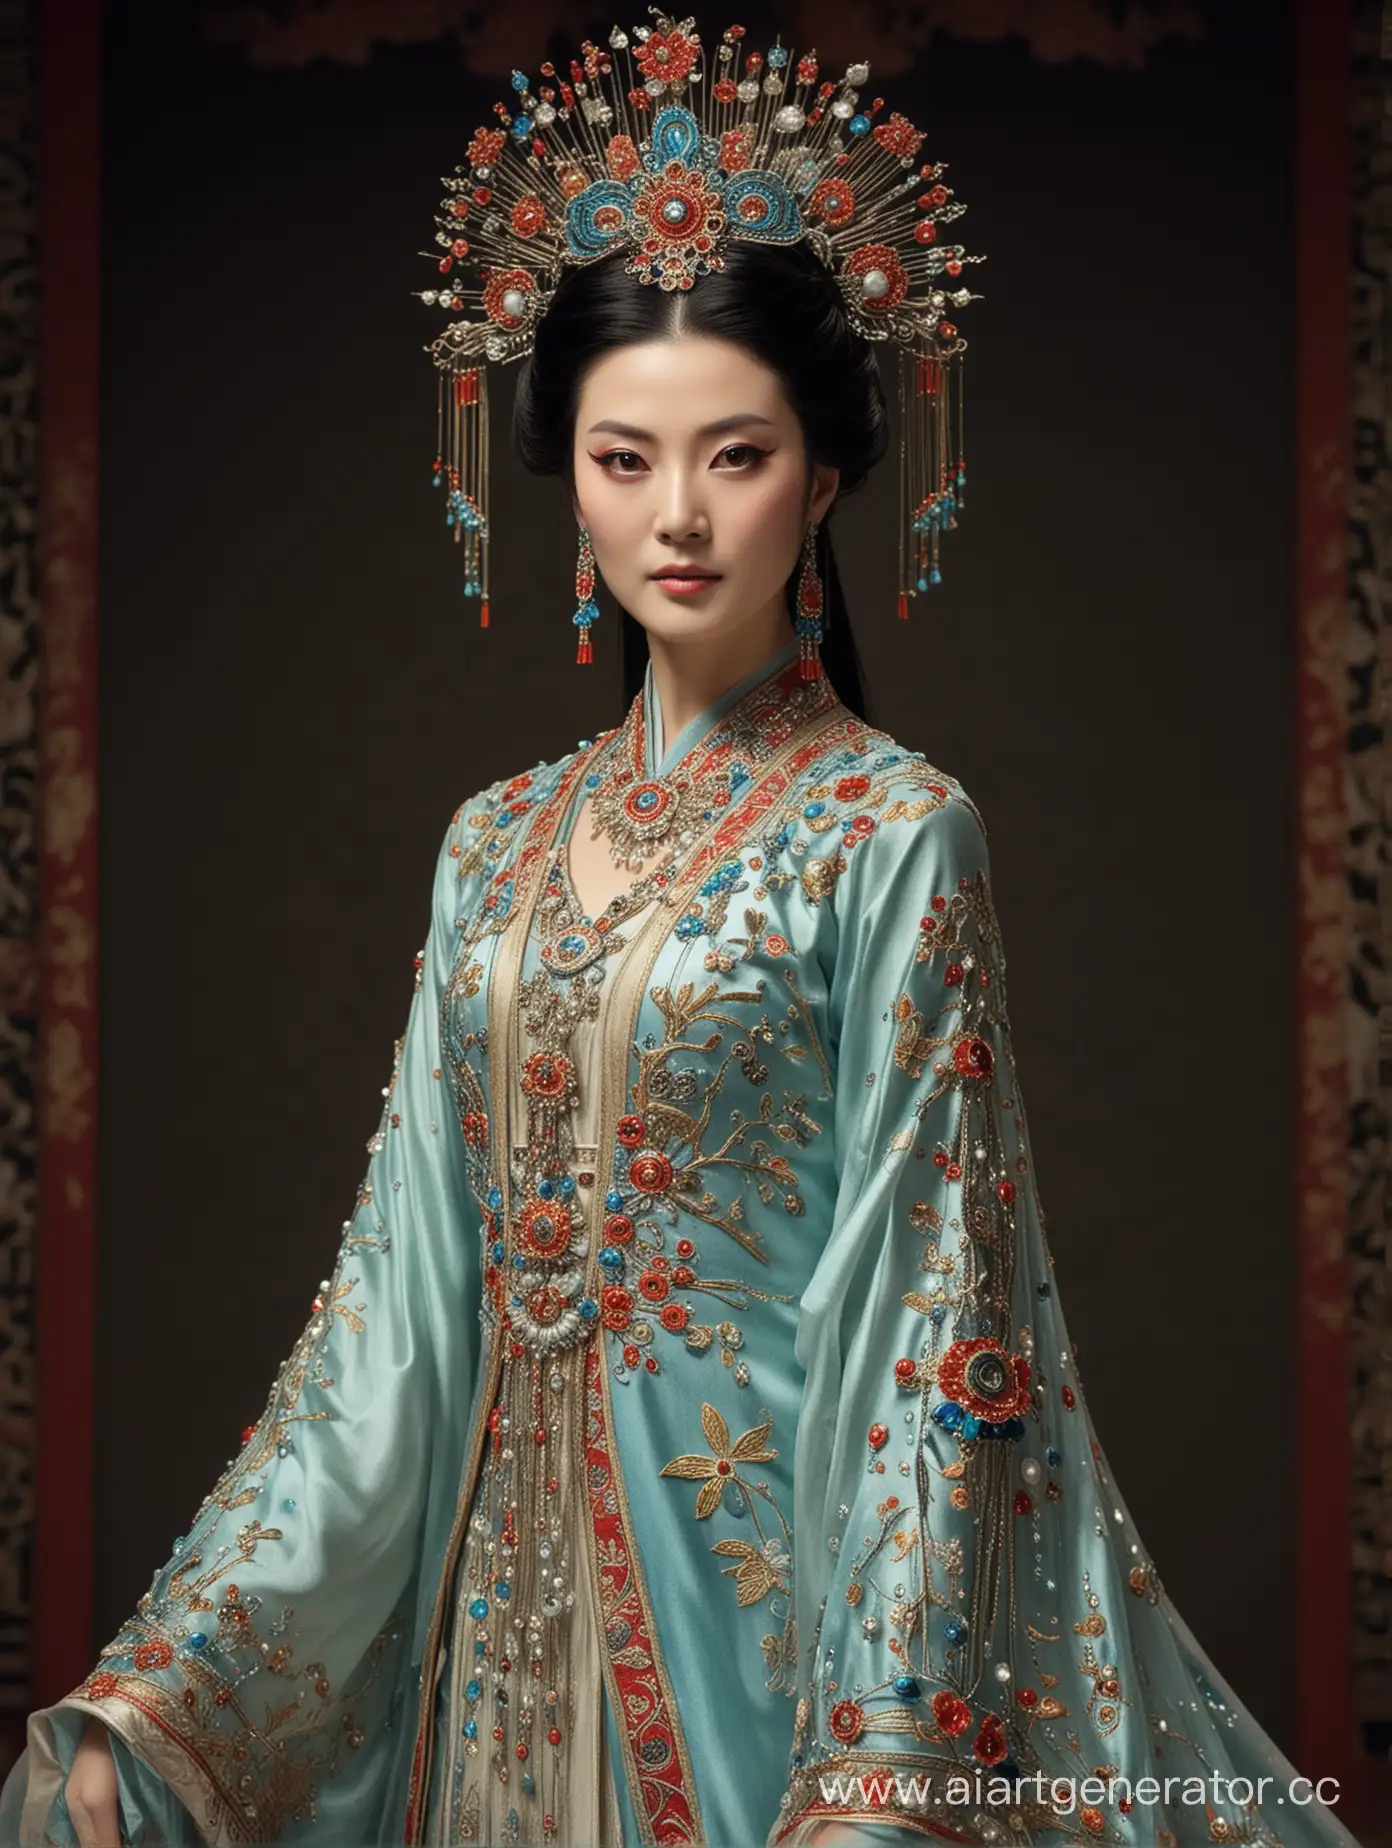 Turandot-Mysterious-Princess-in-Majestic-Costume-and-Jewelry